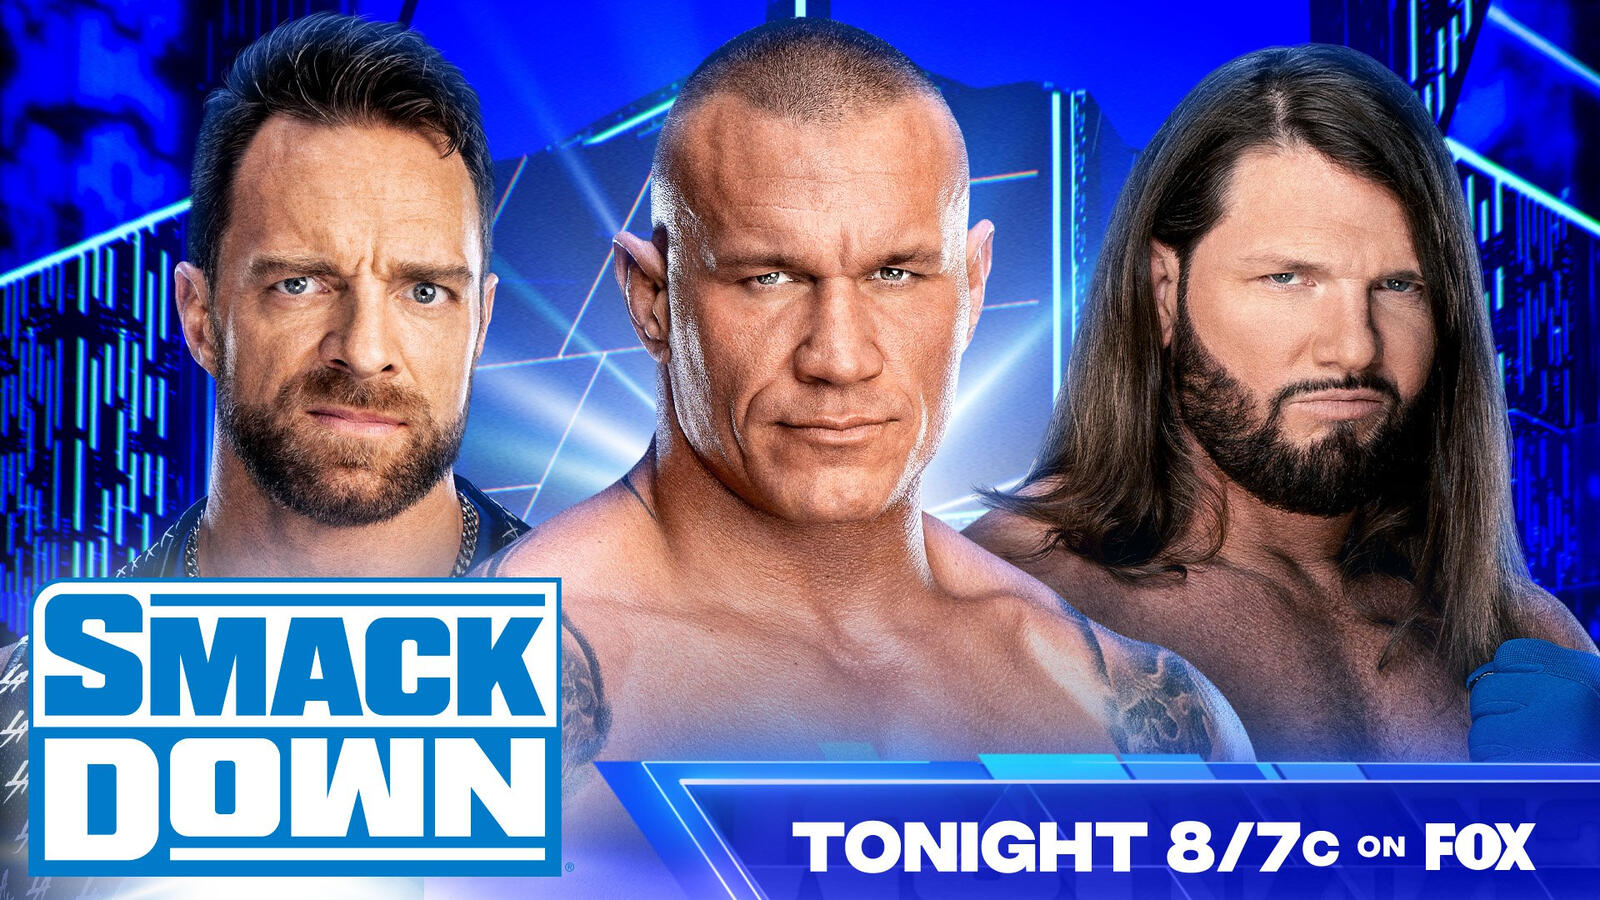 1/12 WWE SmackDown Preview